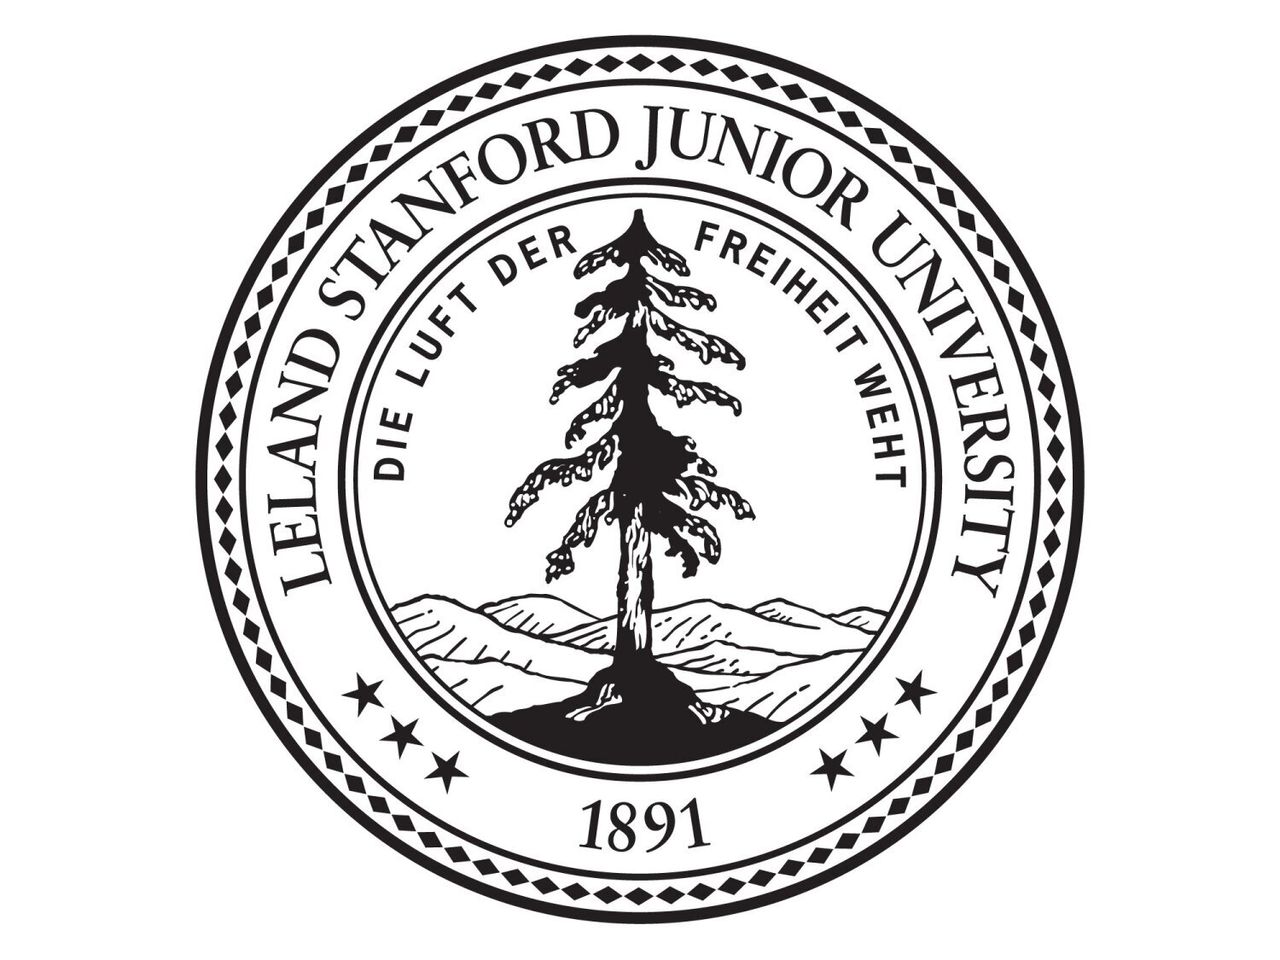 Stanford University seal, graphic element on white